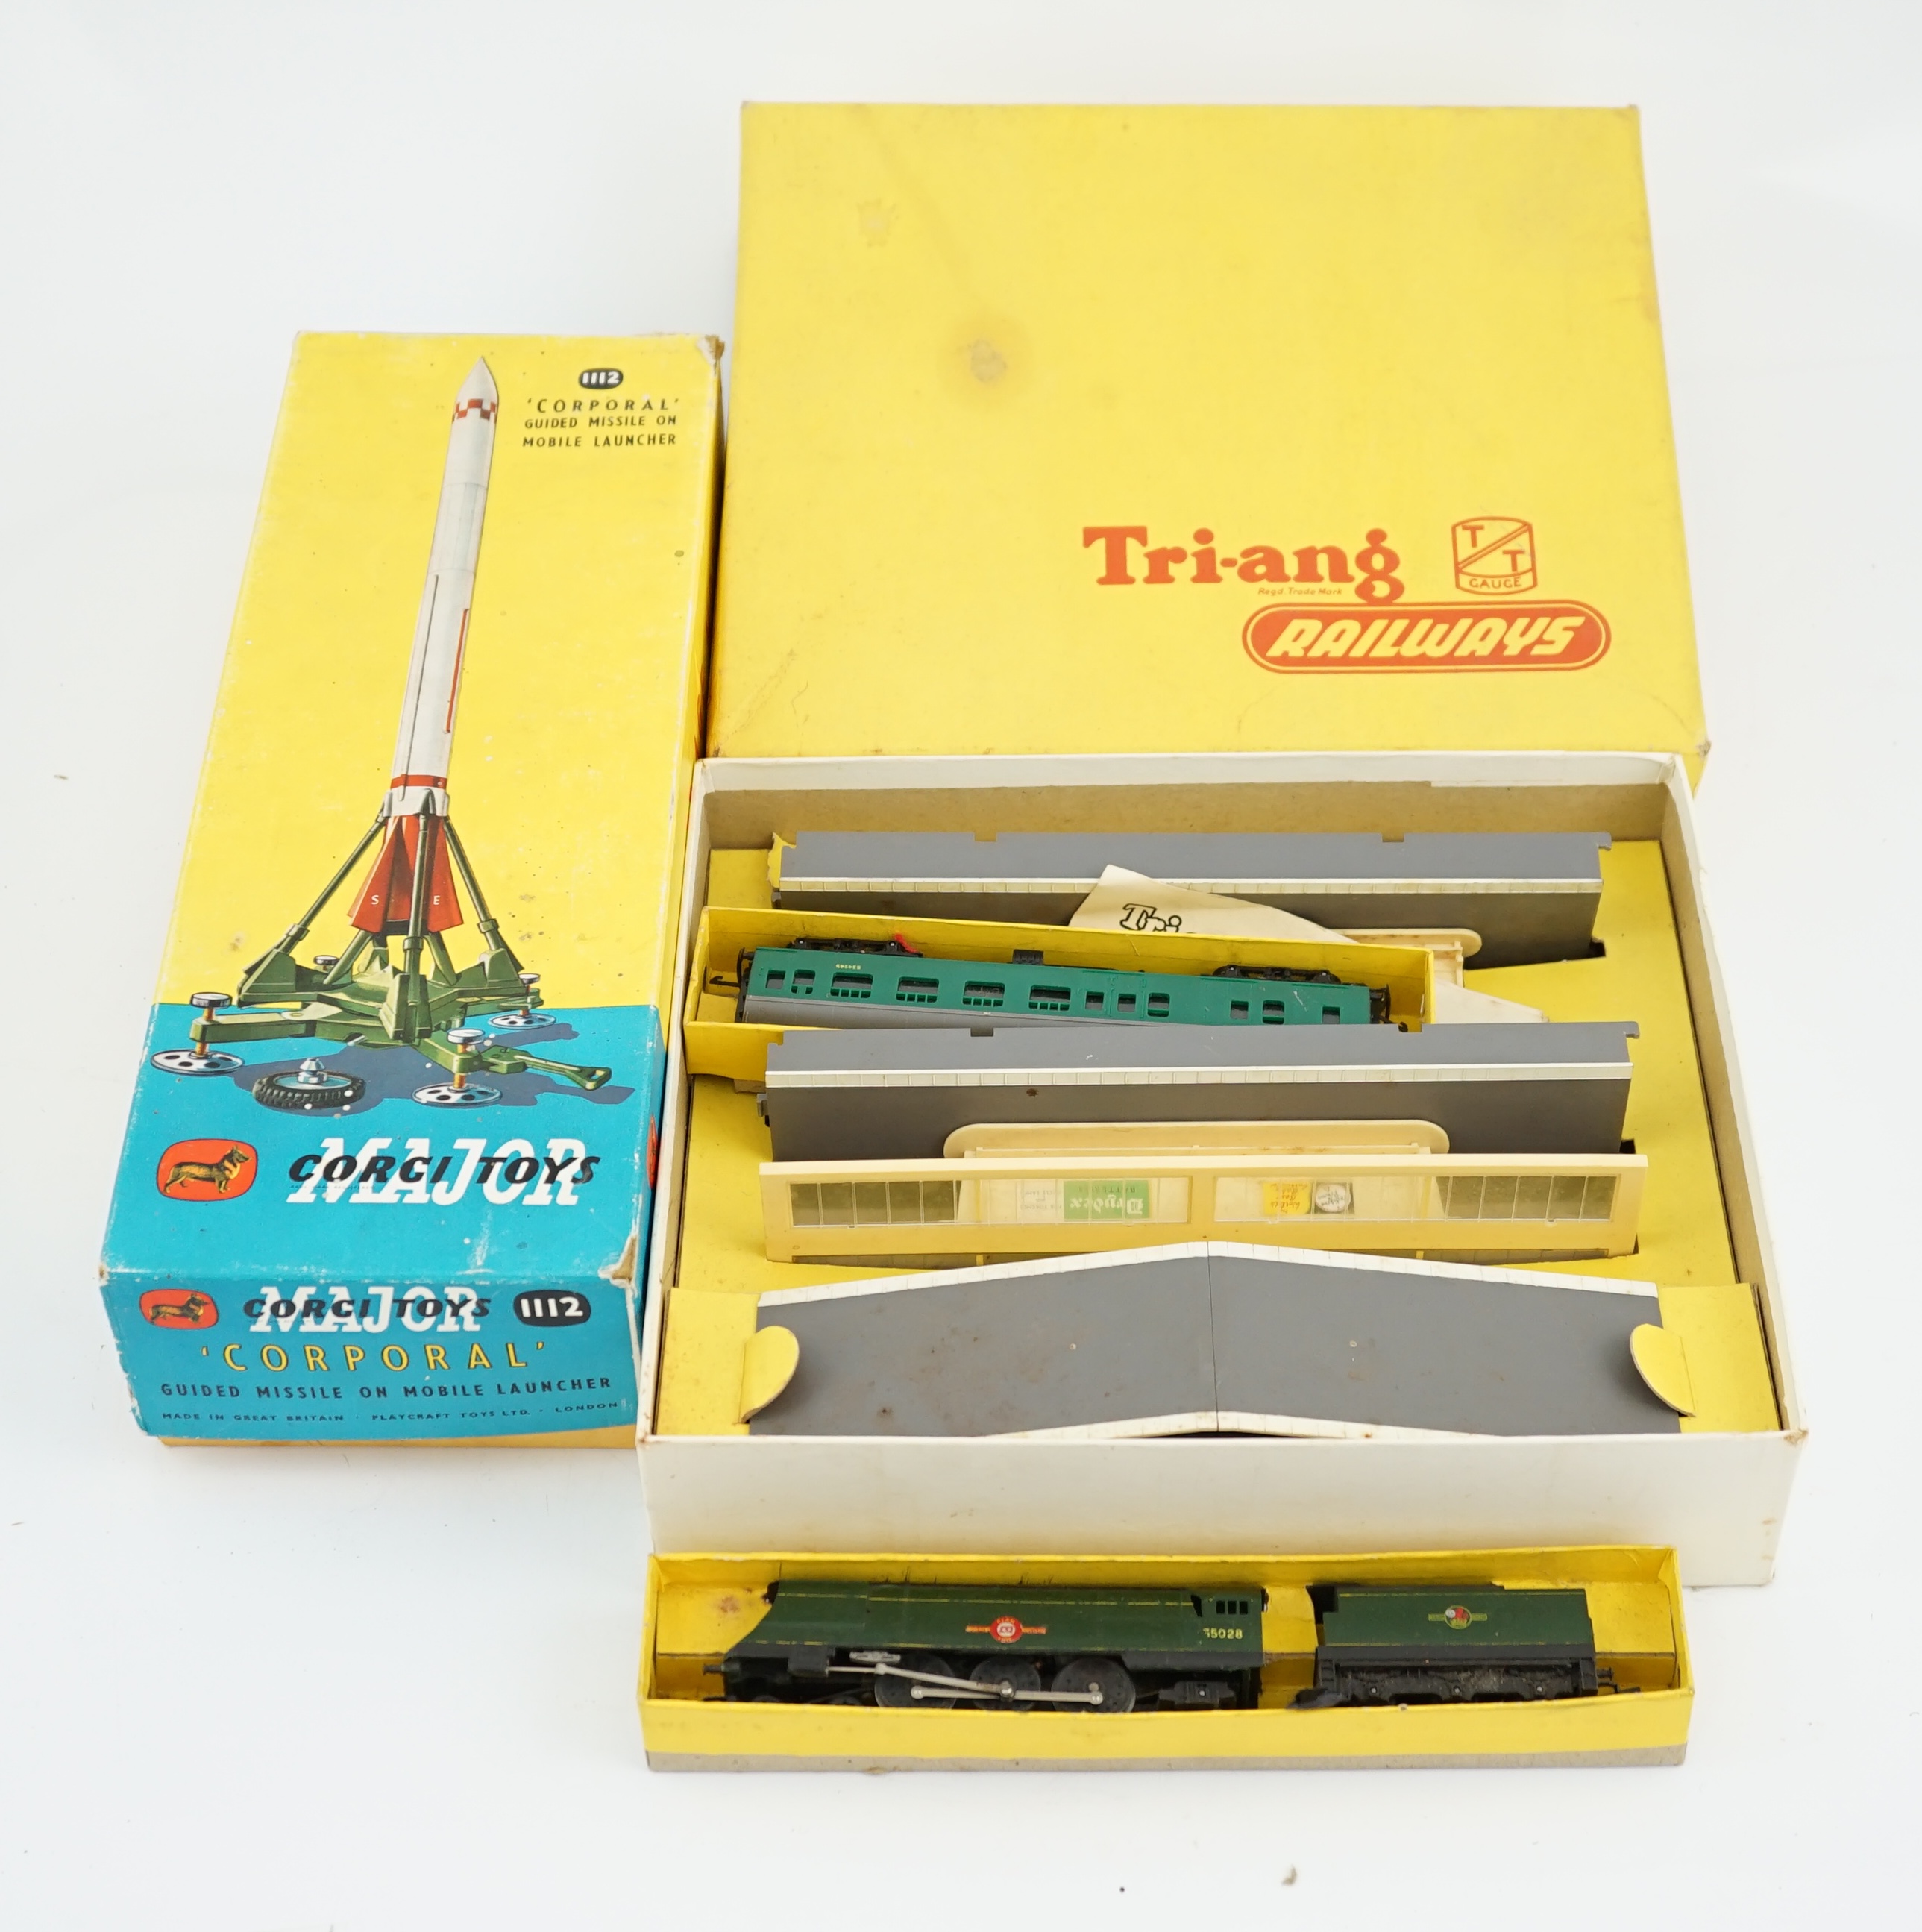 A boxed Corgi Major Toys Corporal Guided Missile on Mobile Launcher (1112), the set is complete with inner packing pieces, ‘Rocket Age’ leaflet, instructions and other paperwork, together with a small quantity of Tri-ang